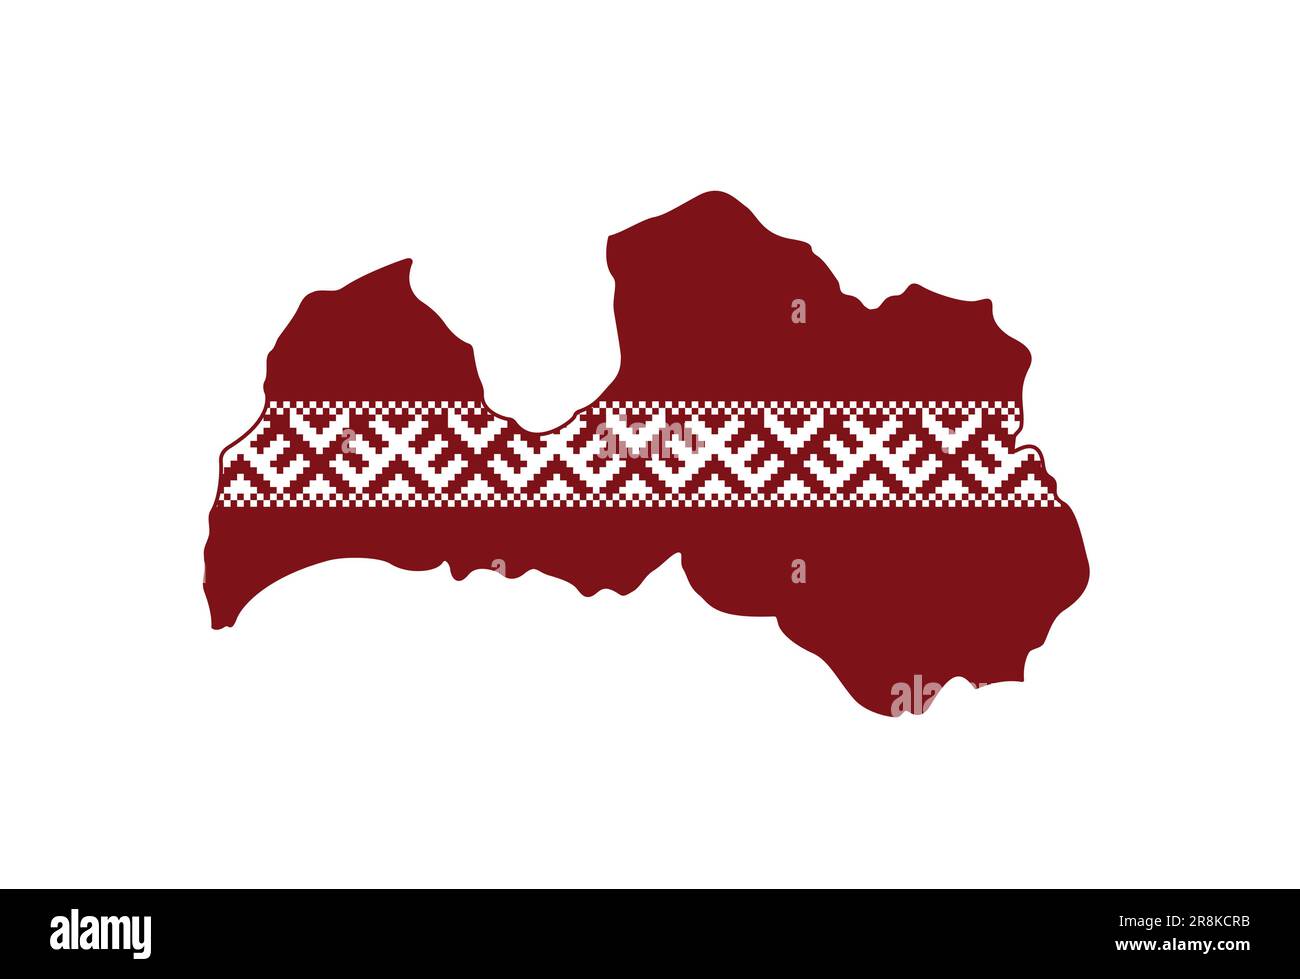 Latvian simplified map shape of latvia with flag and traditional stitched pattern symbol icon latvija vector isolated on white background Stock Vector